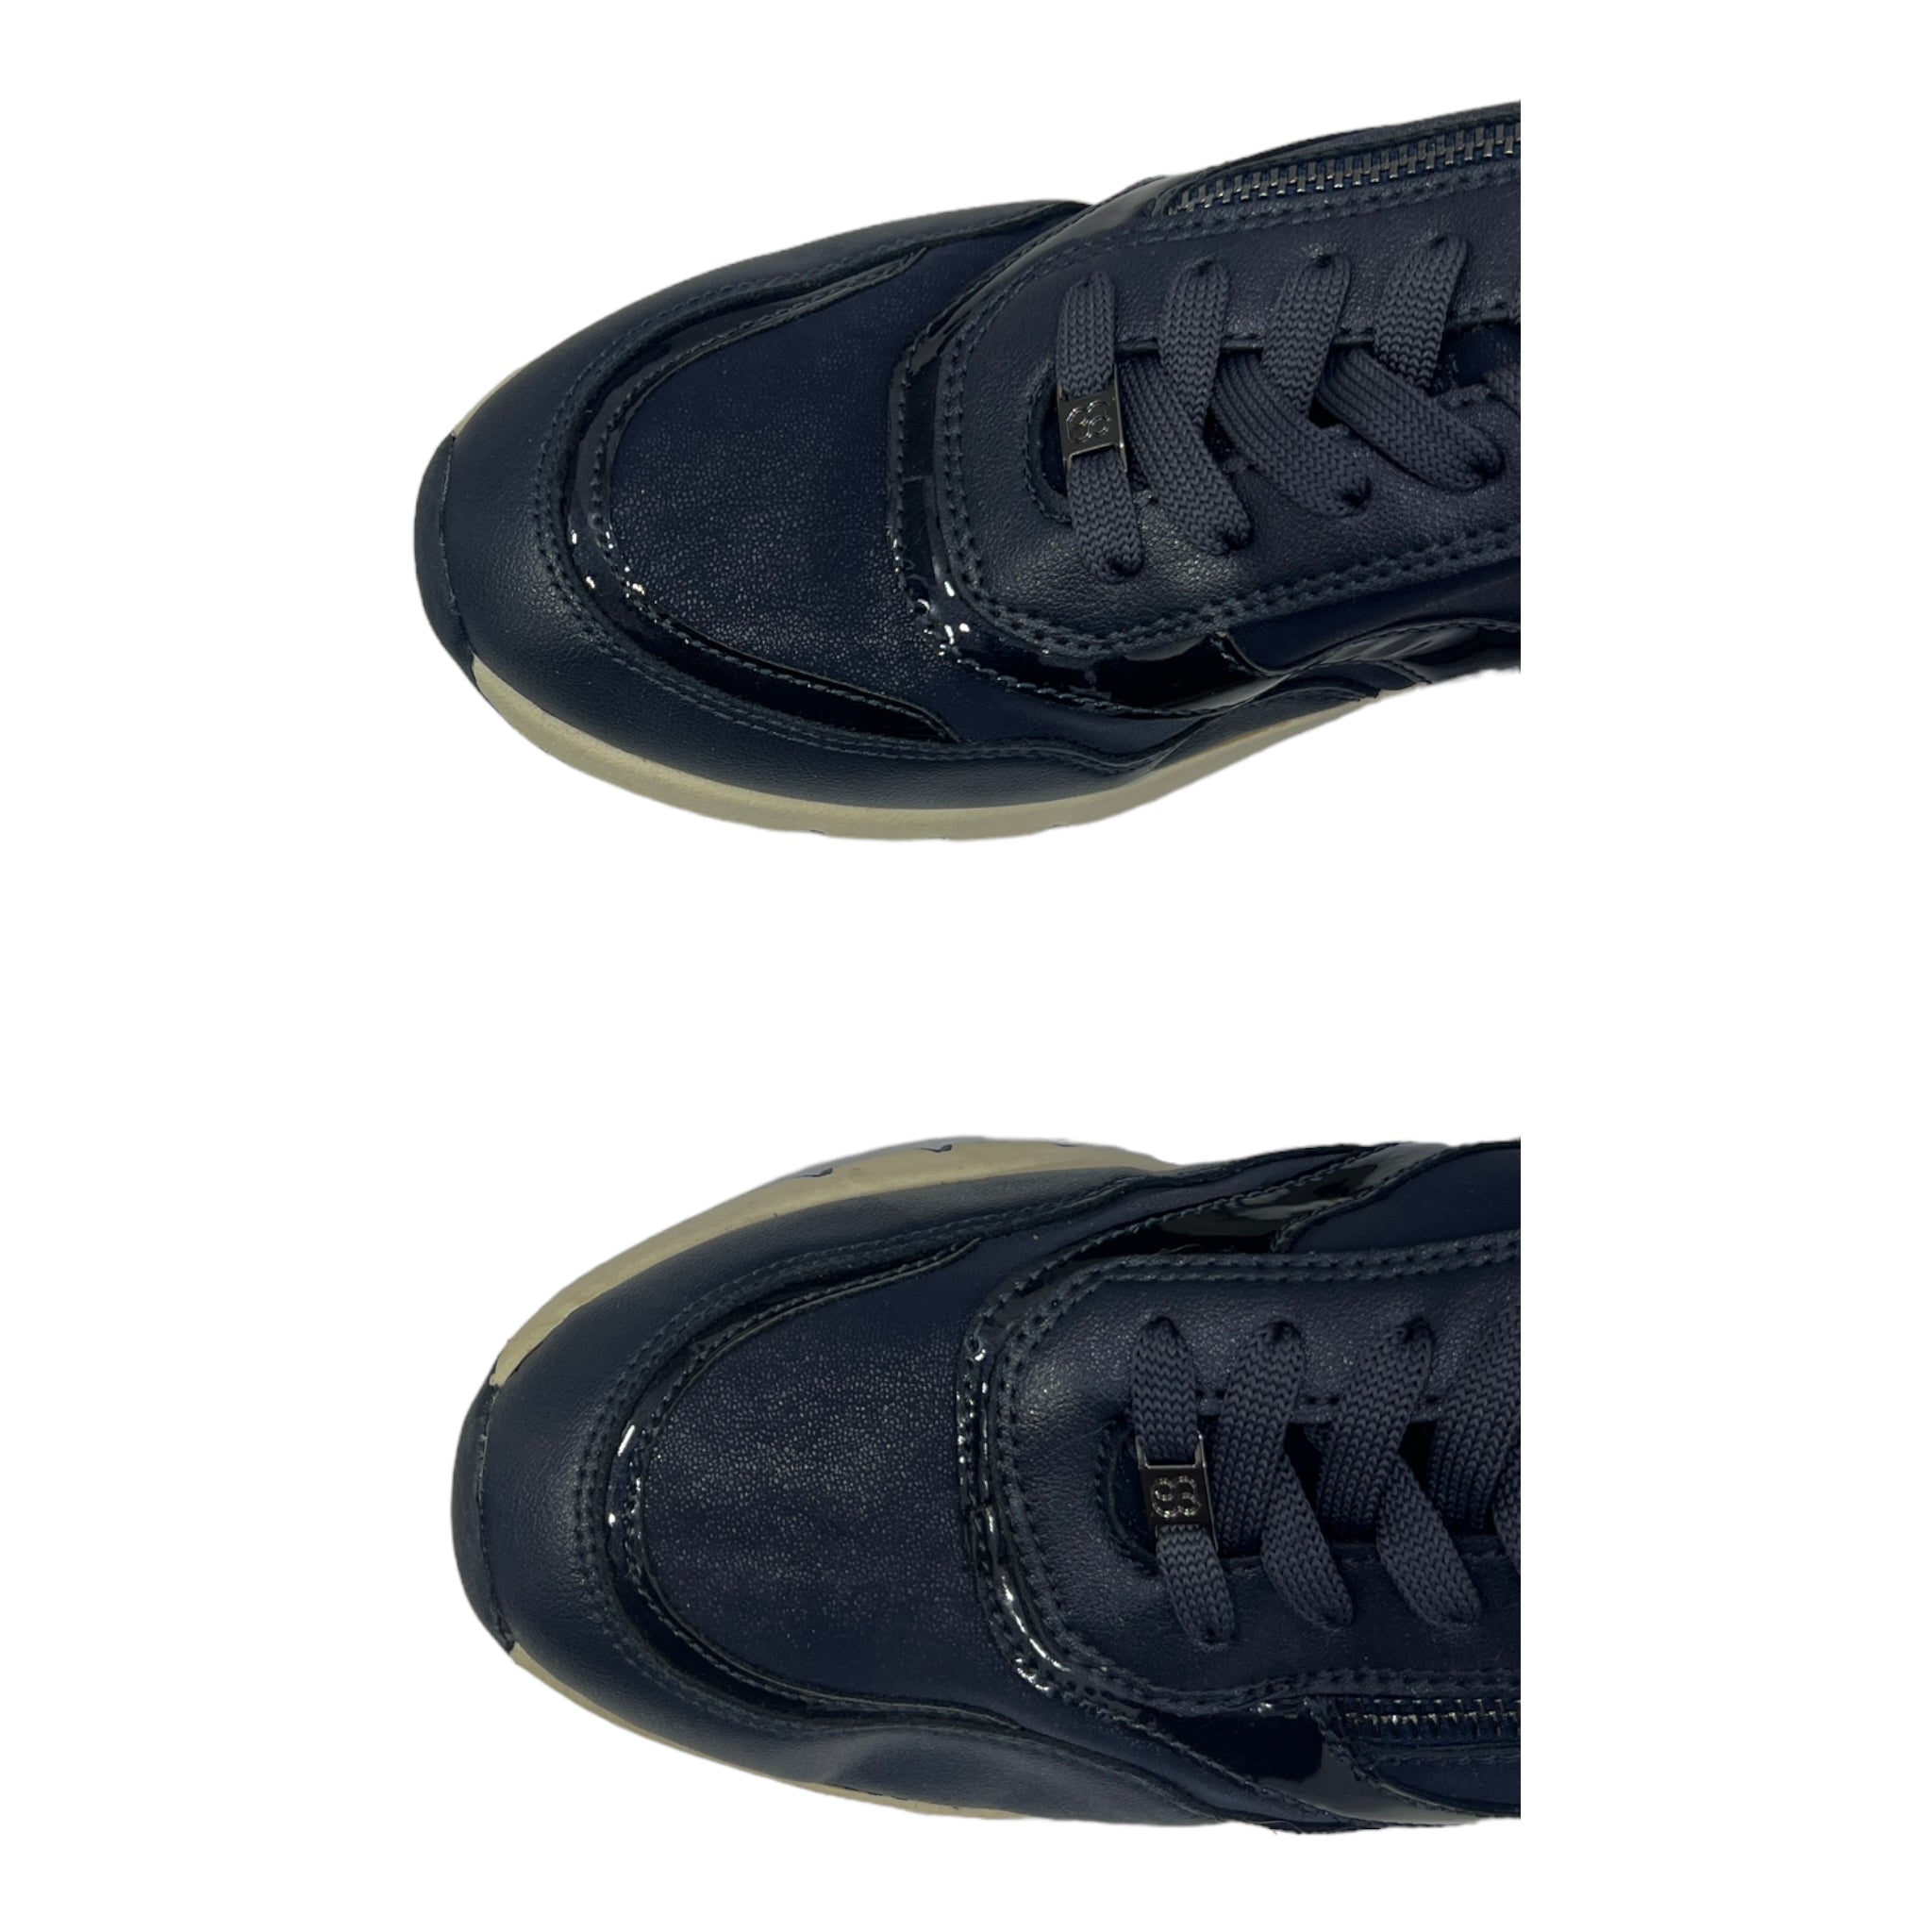 S.OLIVER NAVY LACE-UP SNEAKERS